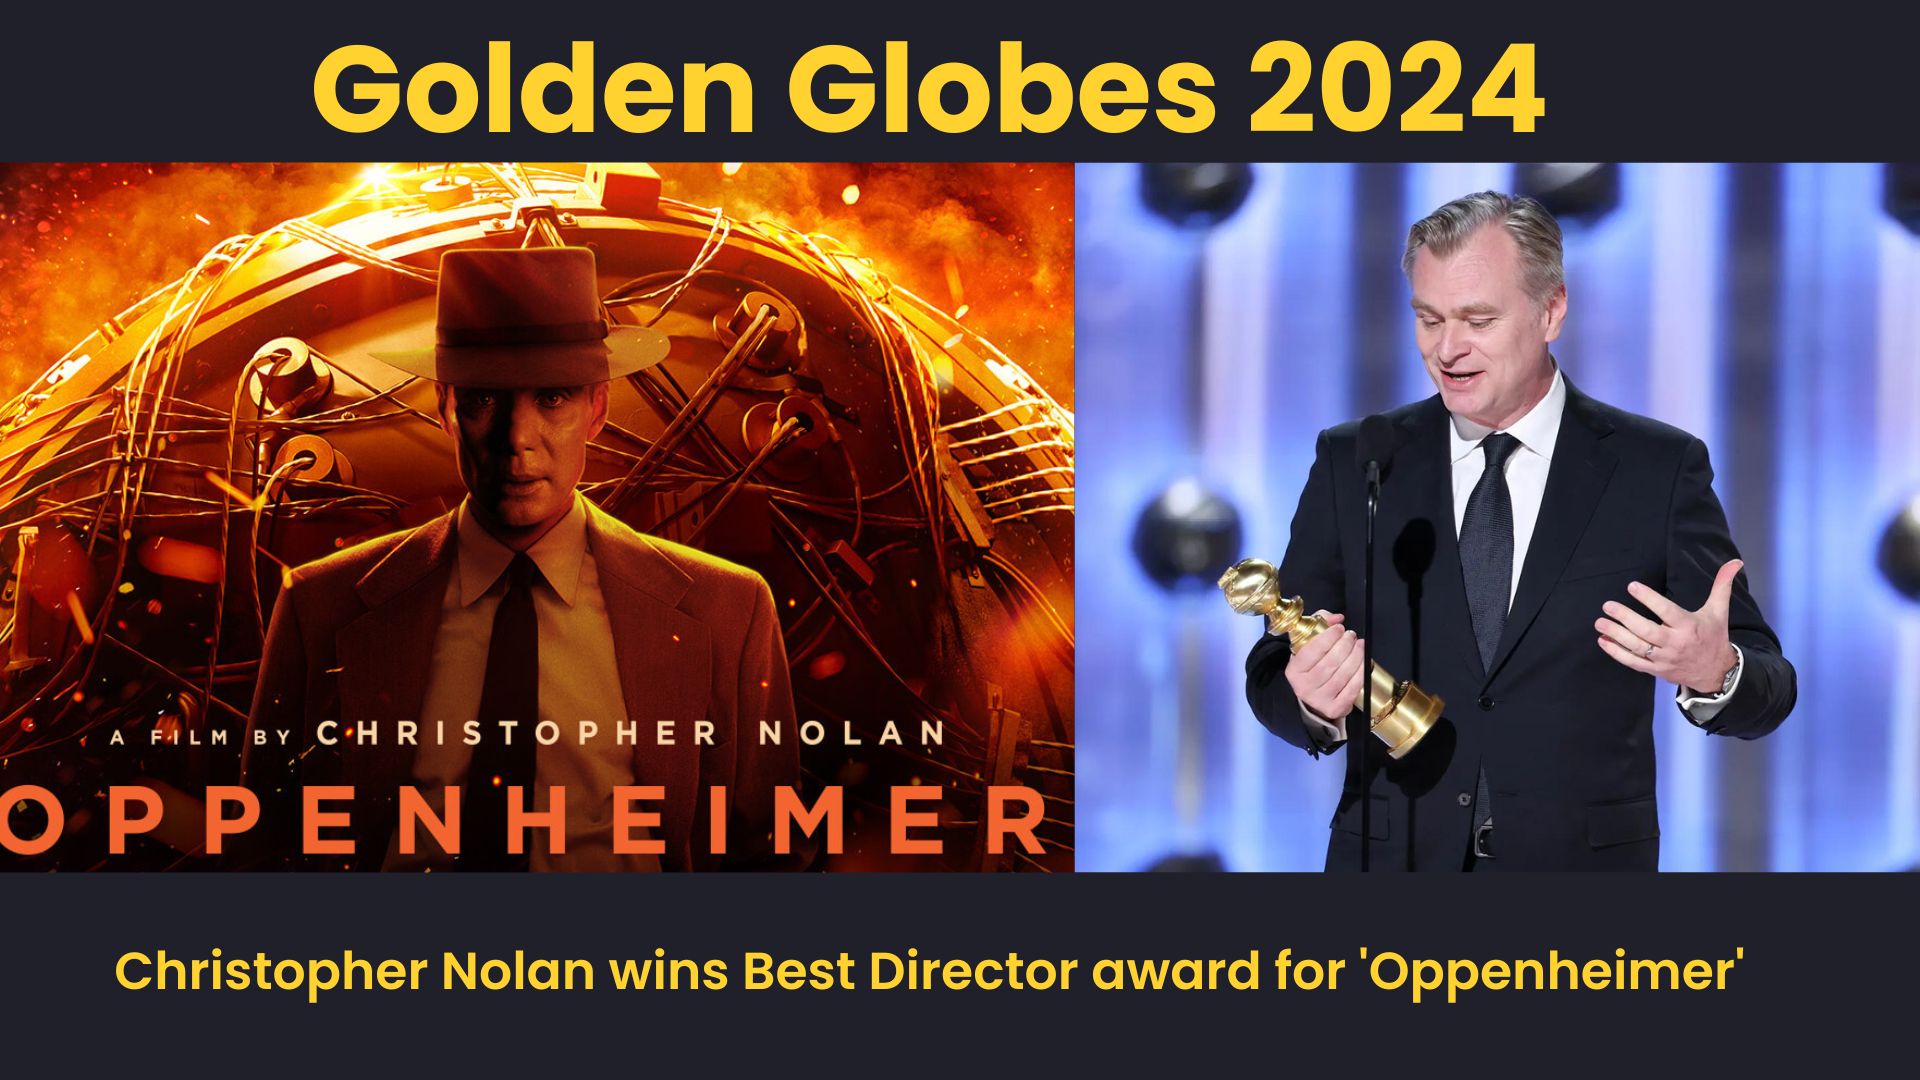 Christopher Nolan Triumphs with Best Director Accolade for ‘Oppenheimer’ at Golden Globes 2024